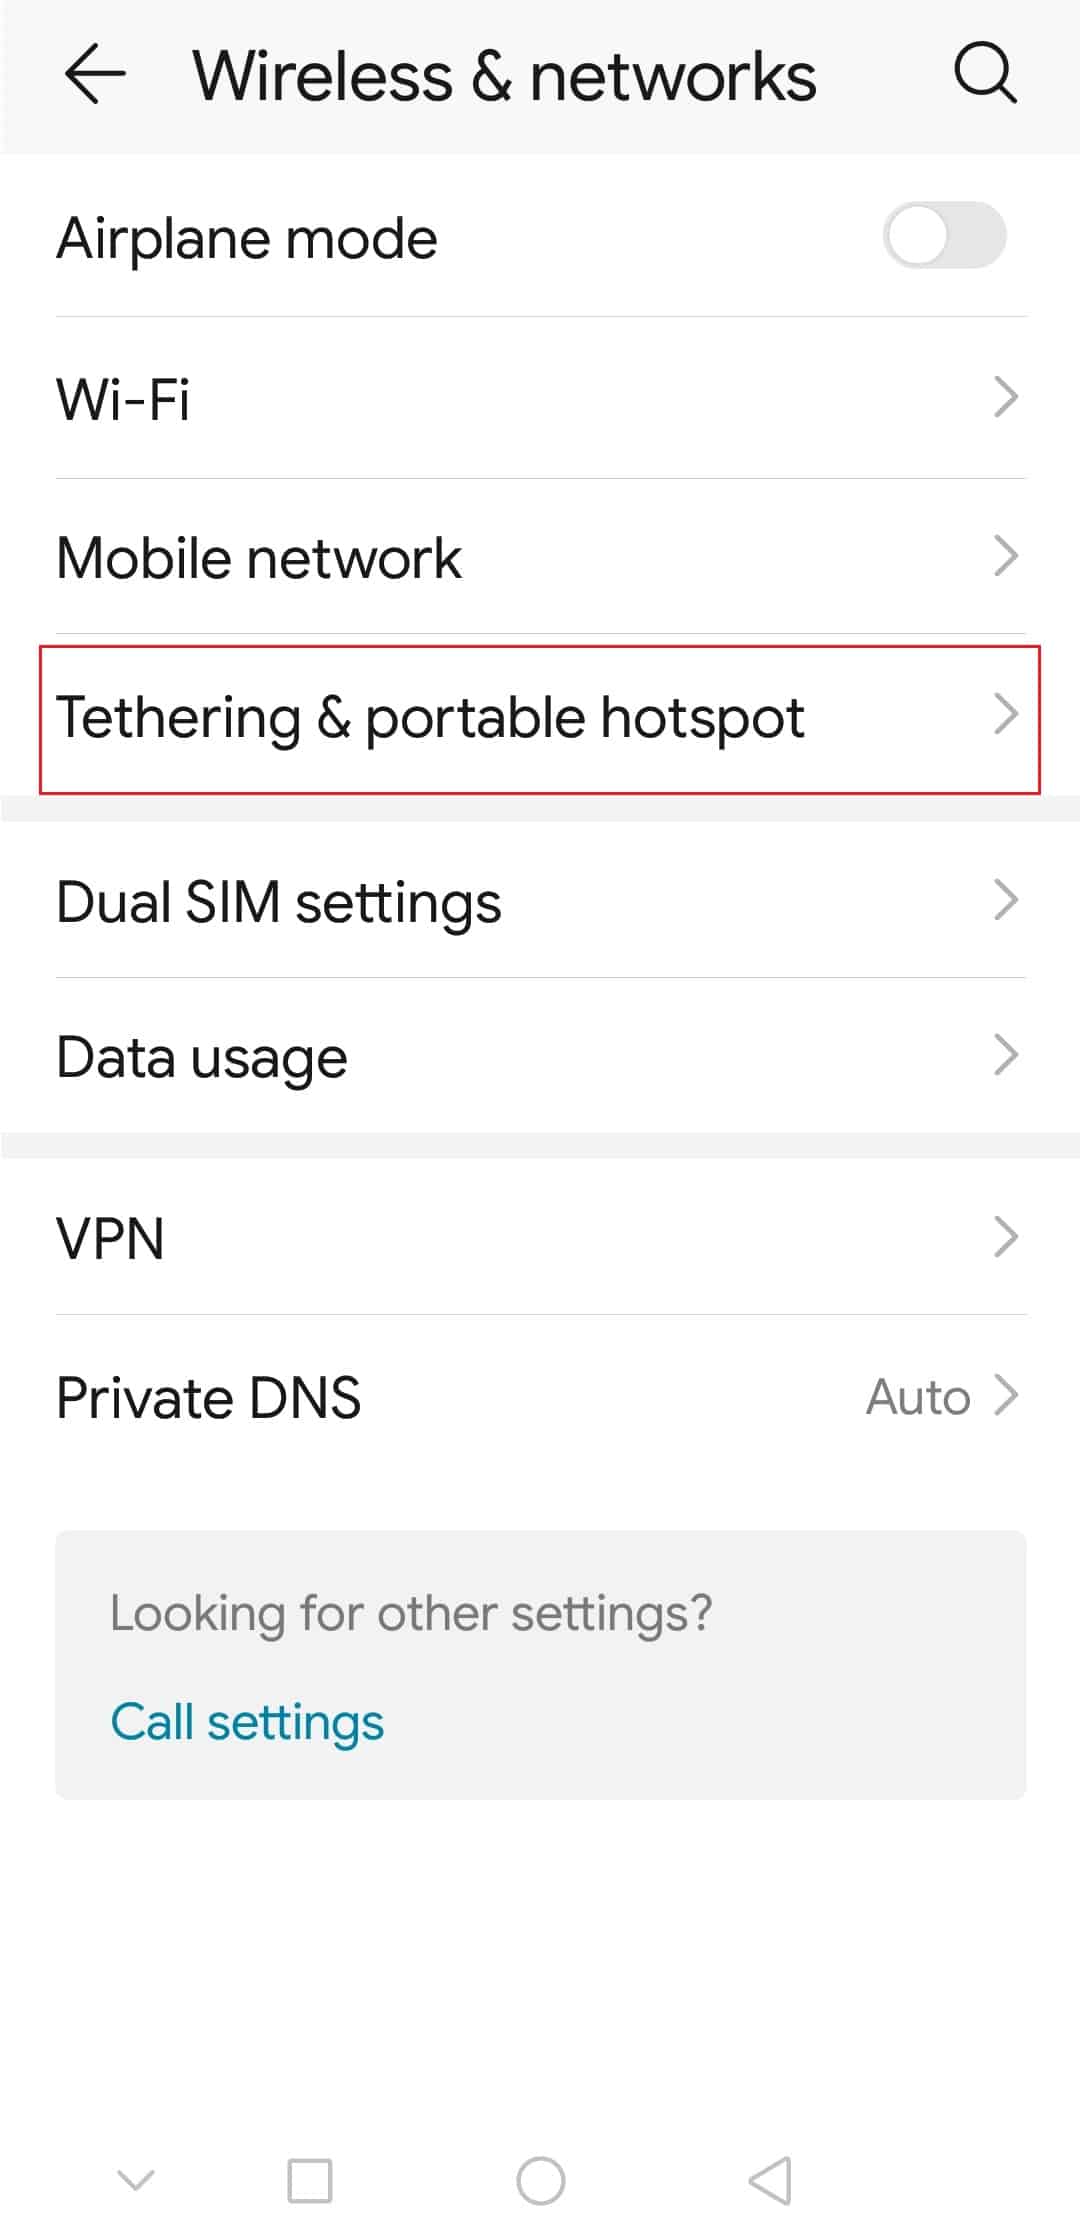 tethering and portable hotspot setting